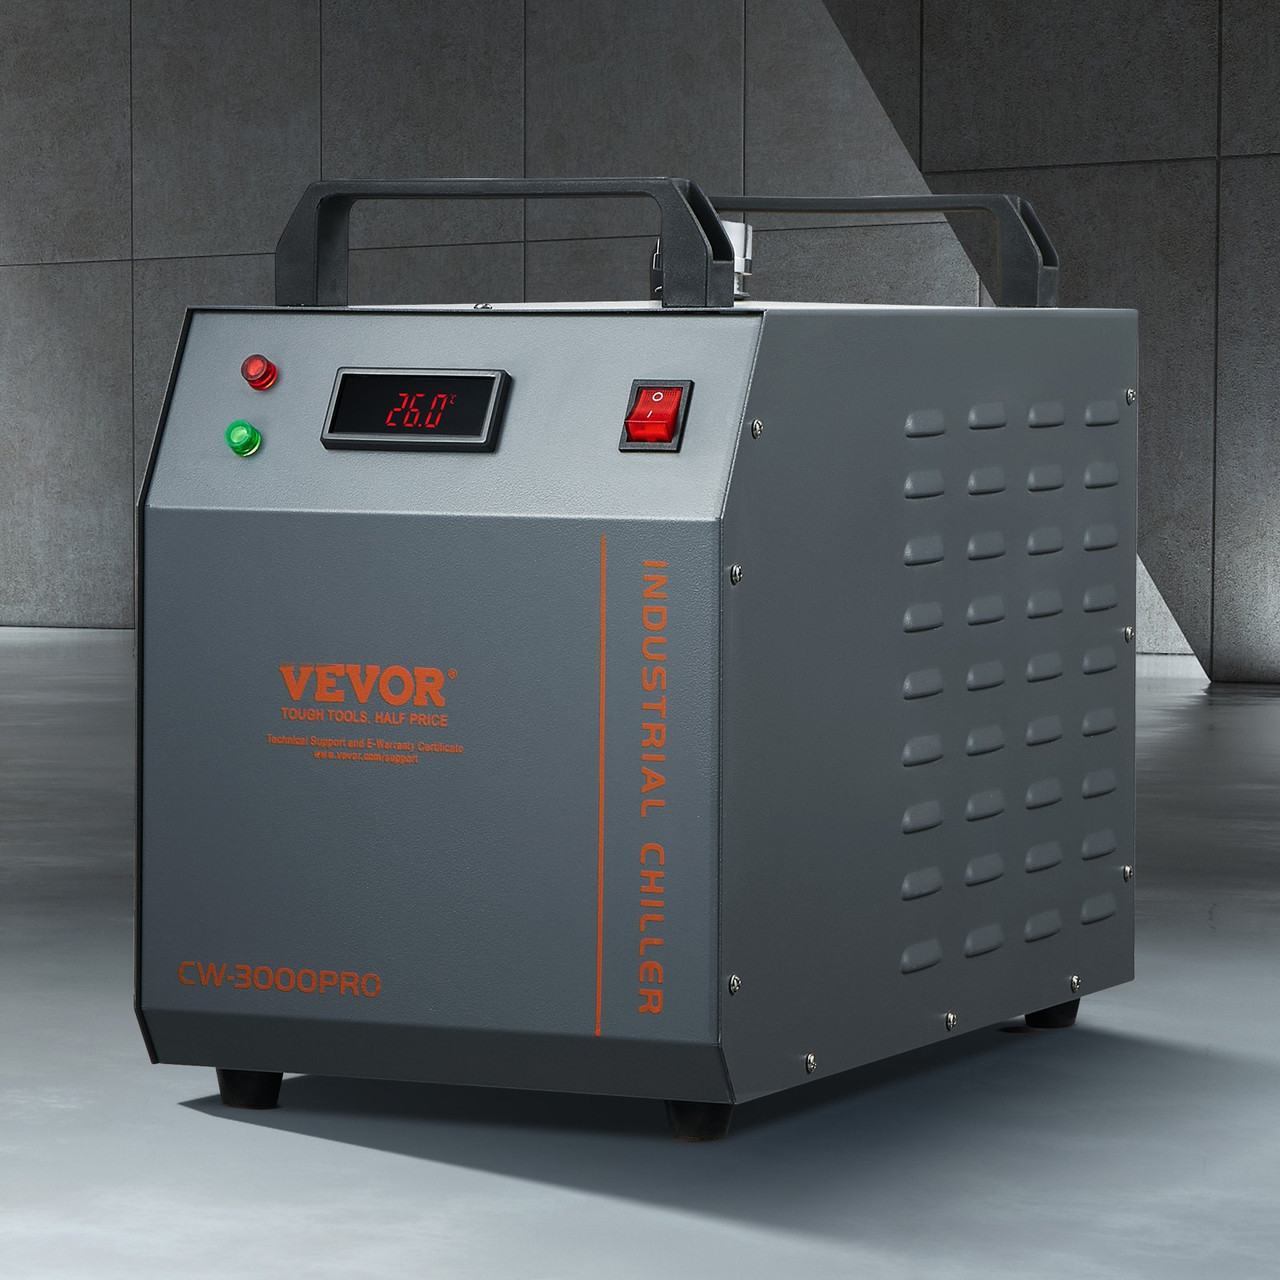 VEVOR Industrial Water Chiller, CW-3000(PRO), 150W Air-Cooled Industrial Water Cooler Cooling System with 12L Water Tank Capacity 18 L/min Max Flow Rate, for Laser Engraving Machine Cooling Machine